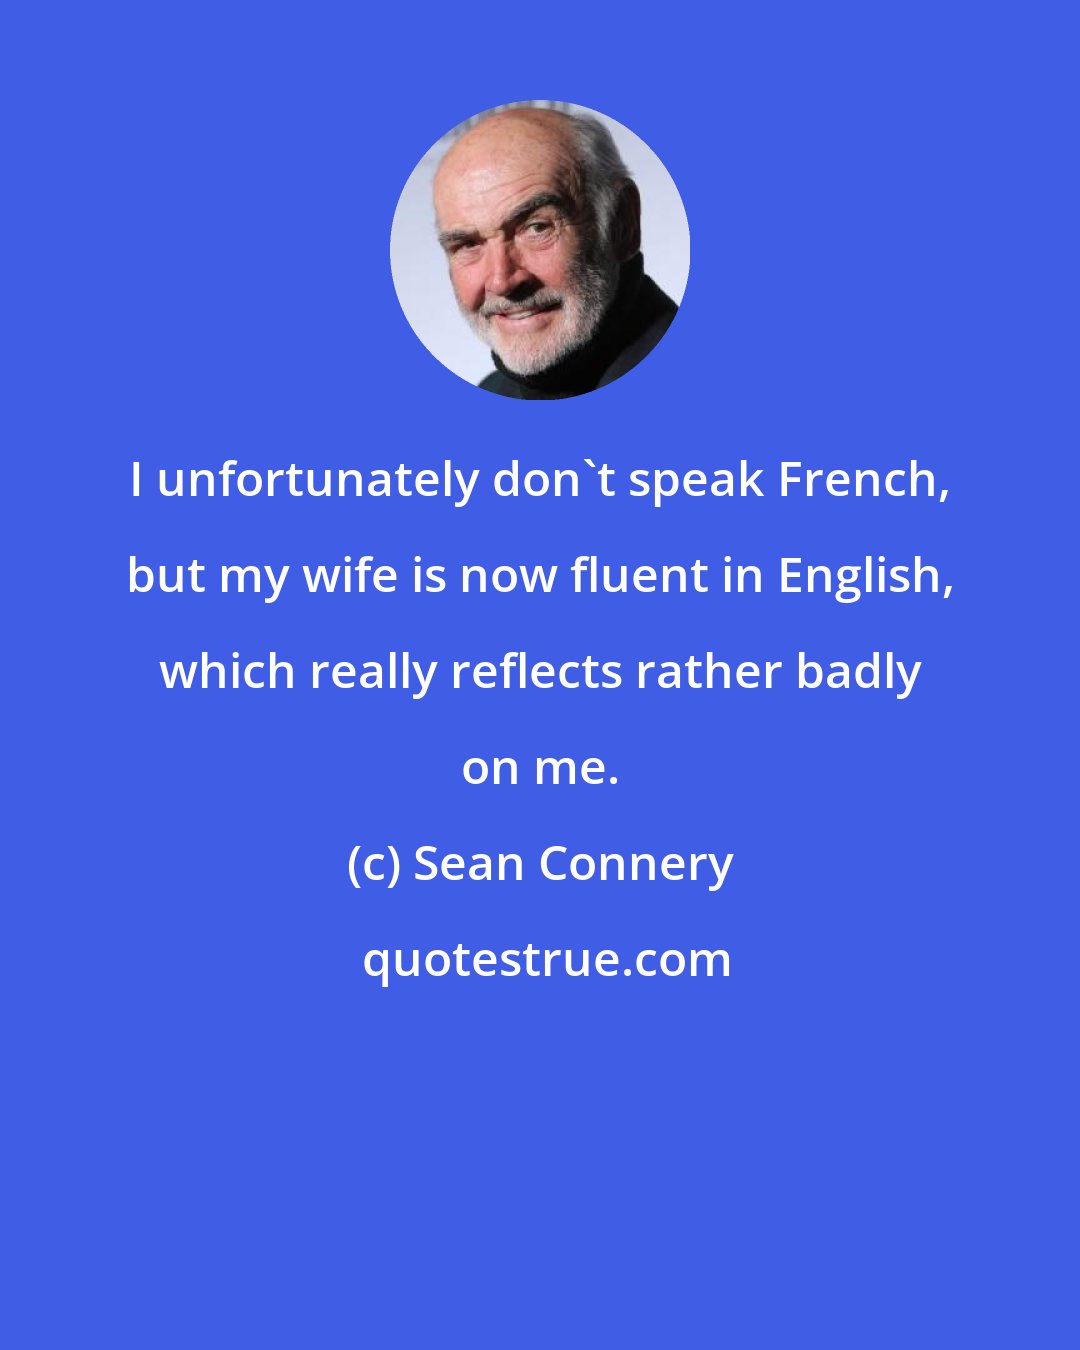 Sean Connery: I unfortunately don't speak French, but my wife is now fluent in English, which really reflects rather badly on me.